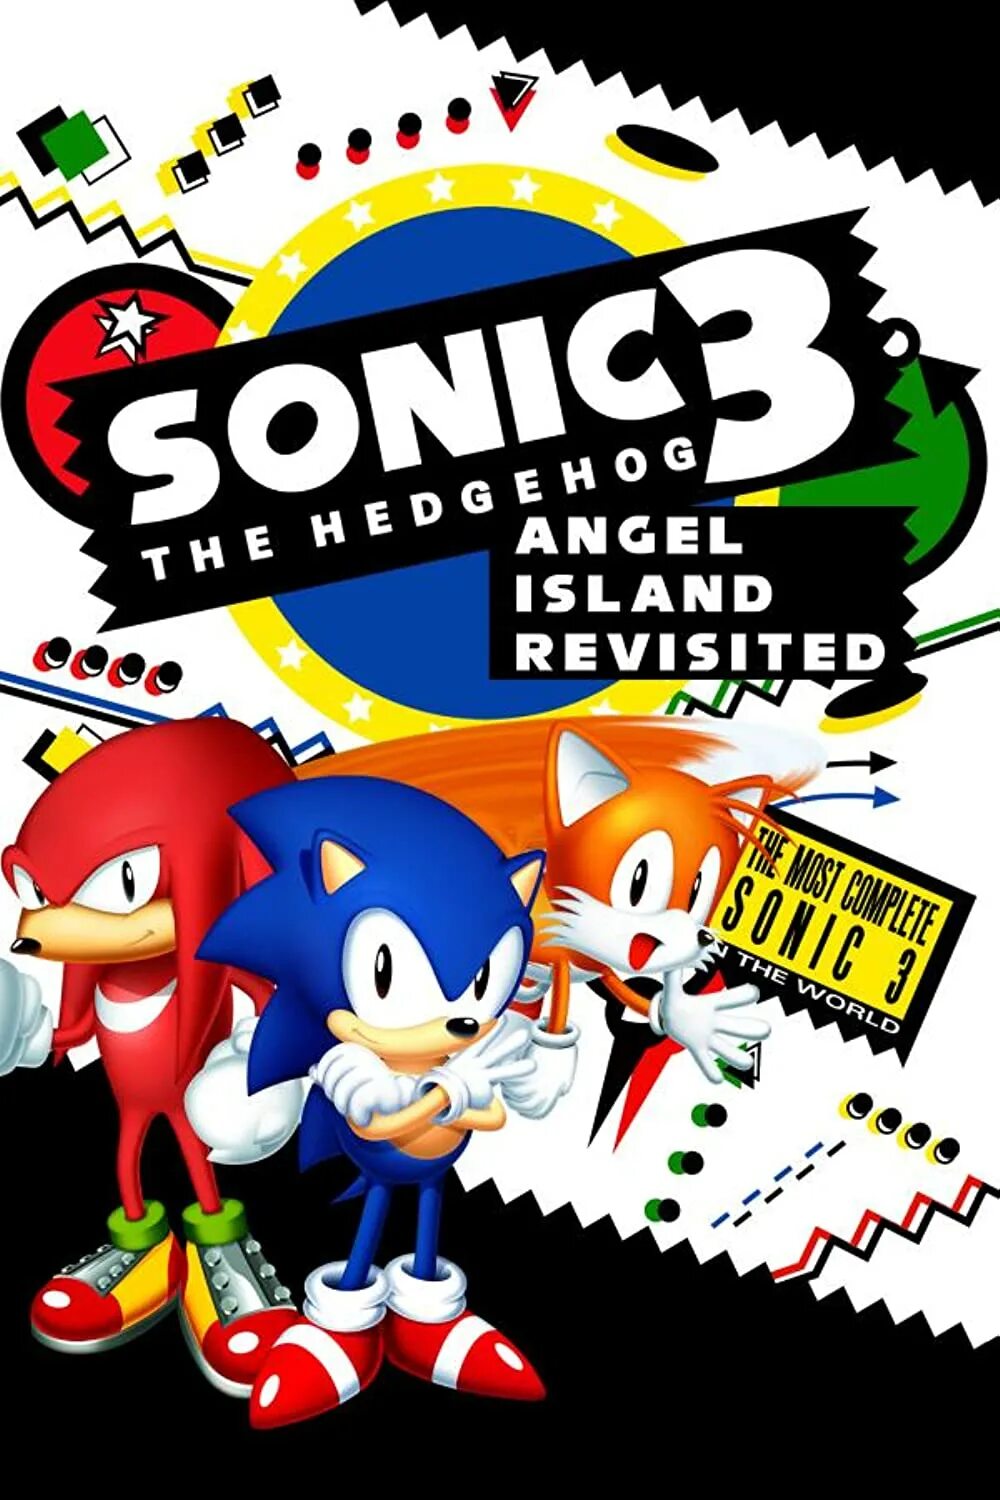 Sonic 3 mobile. Игра Sonic the Hedgehog 3. Sonic 3 Air. Sonic 3 Air logo. Angel Island! (Sonic 3 and Knuckles).